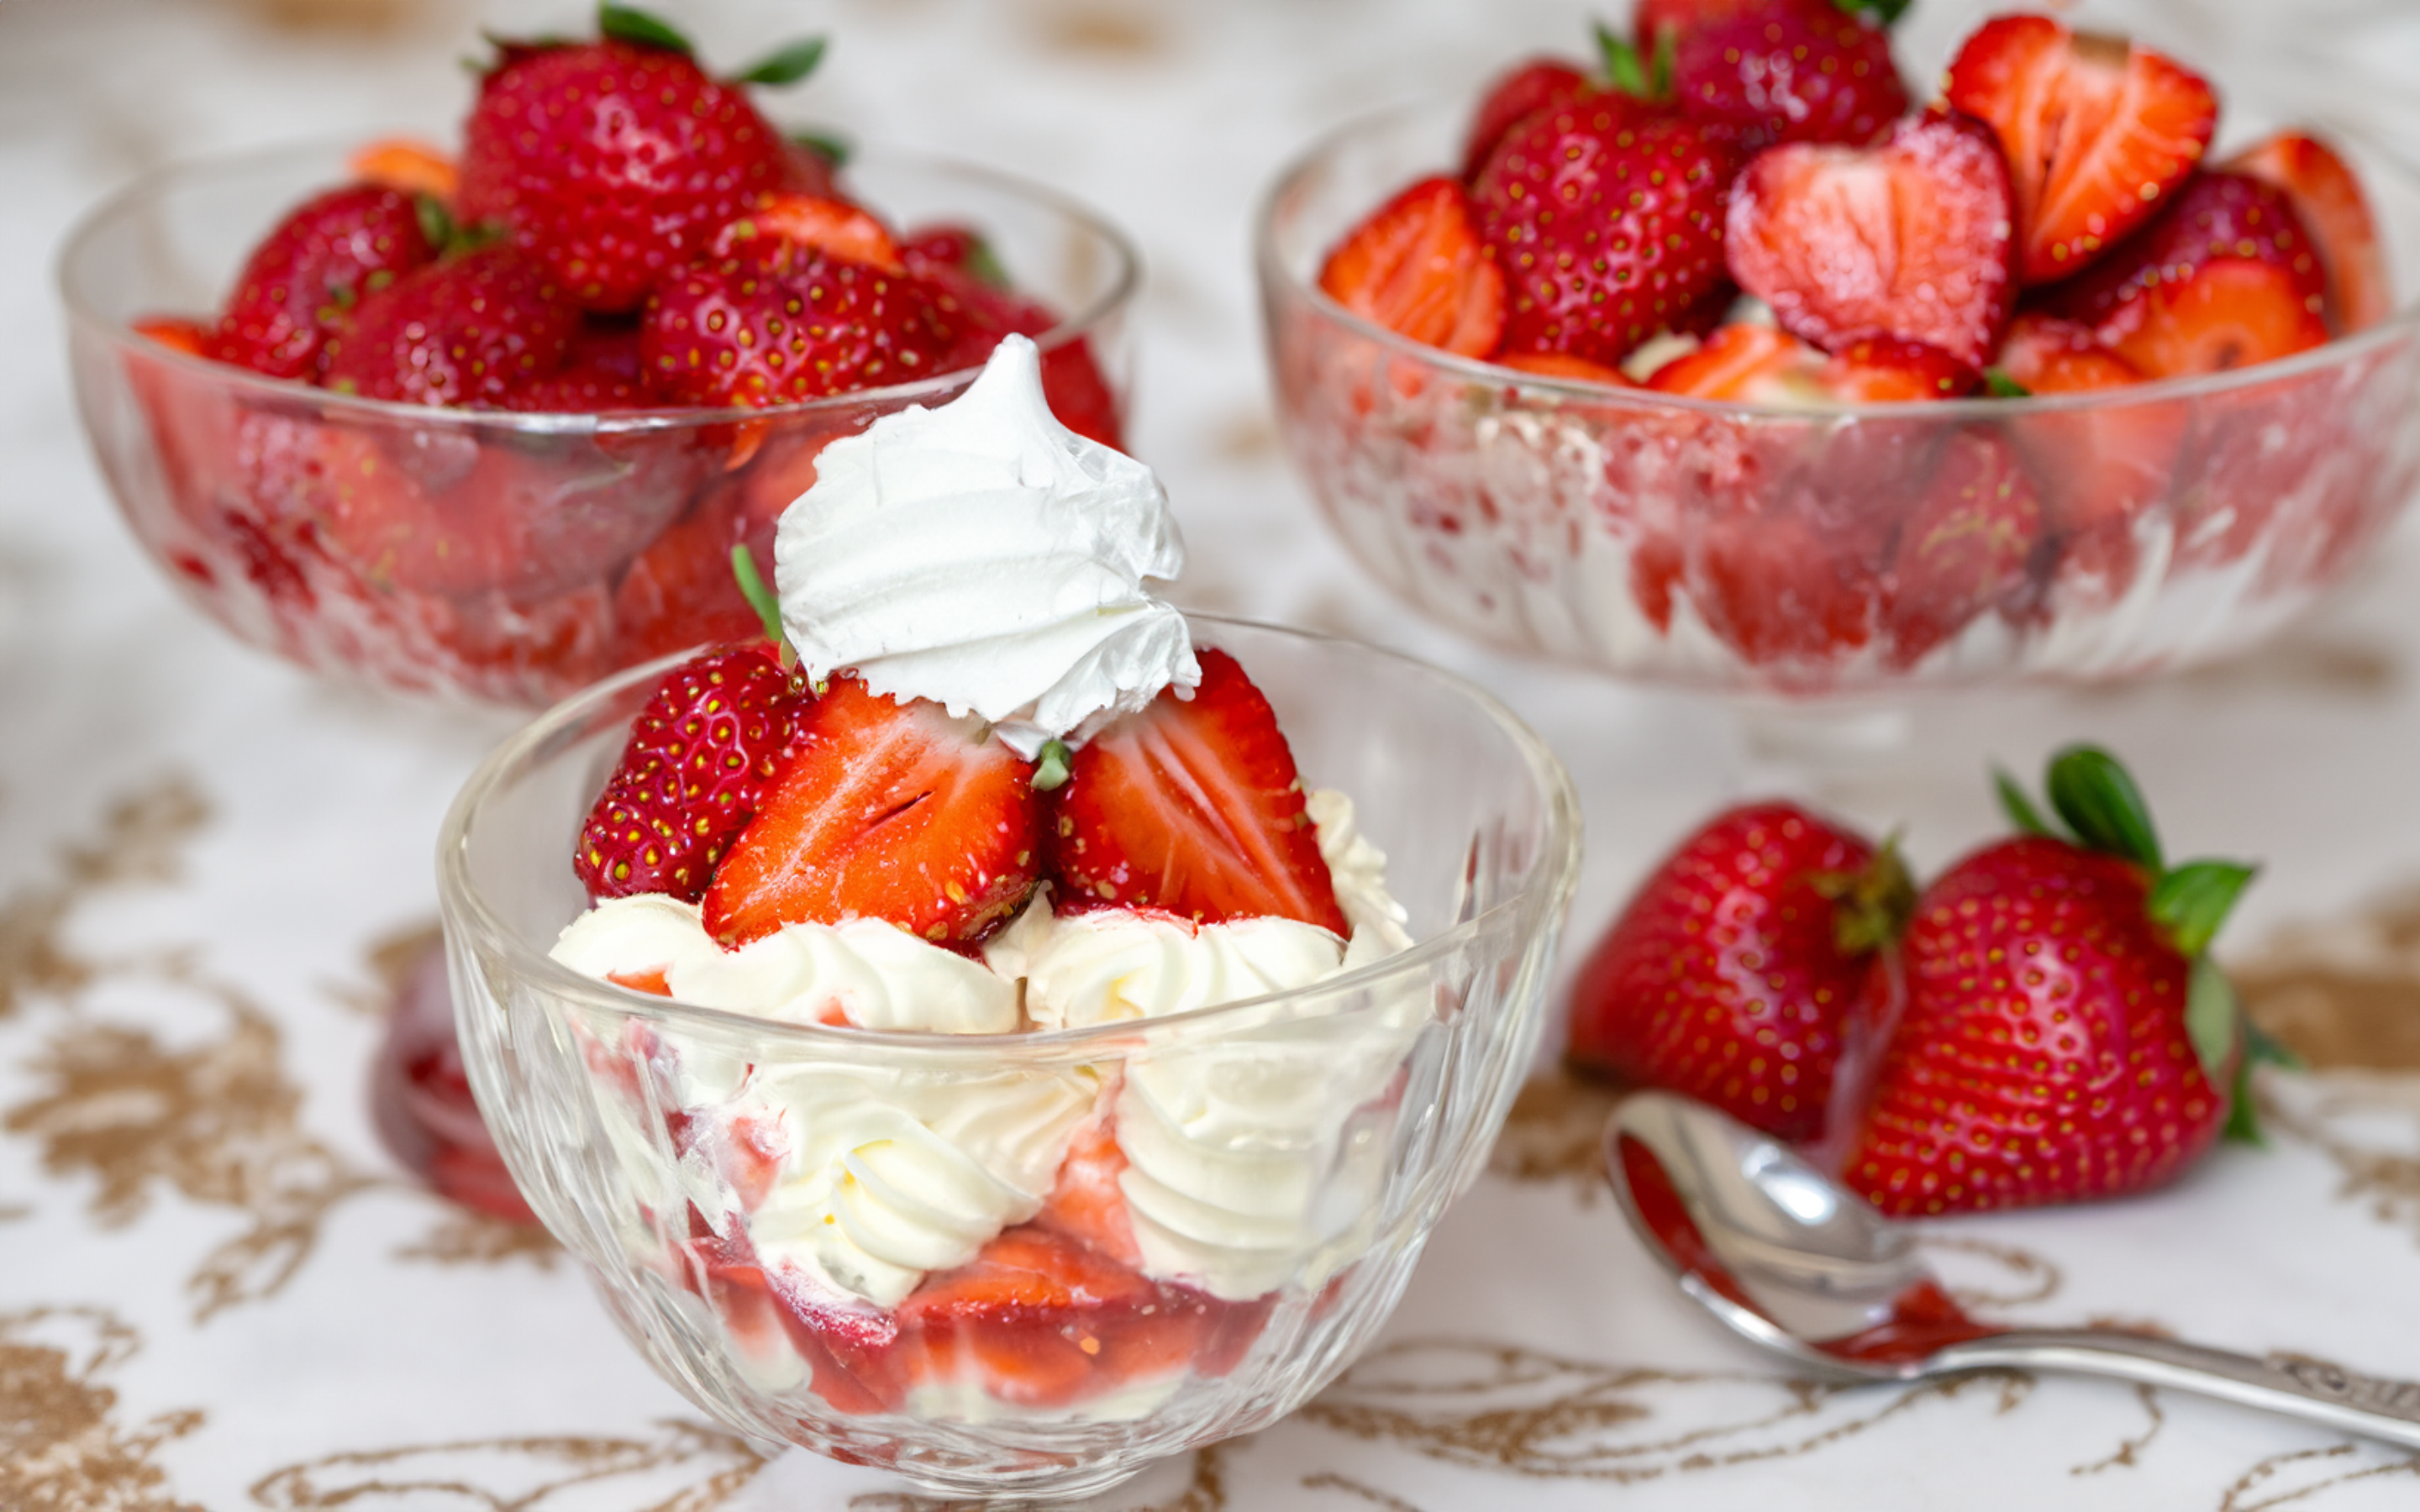 an image of a dessert with vanilla ice cream, strawberries, meringue nests and whipped cream